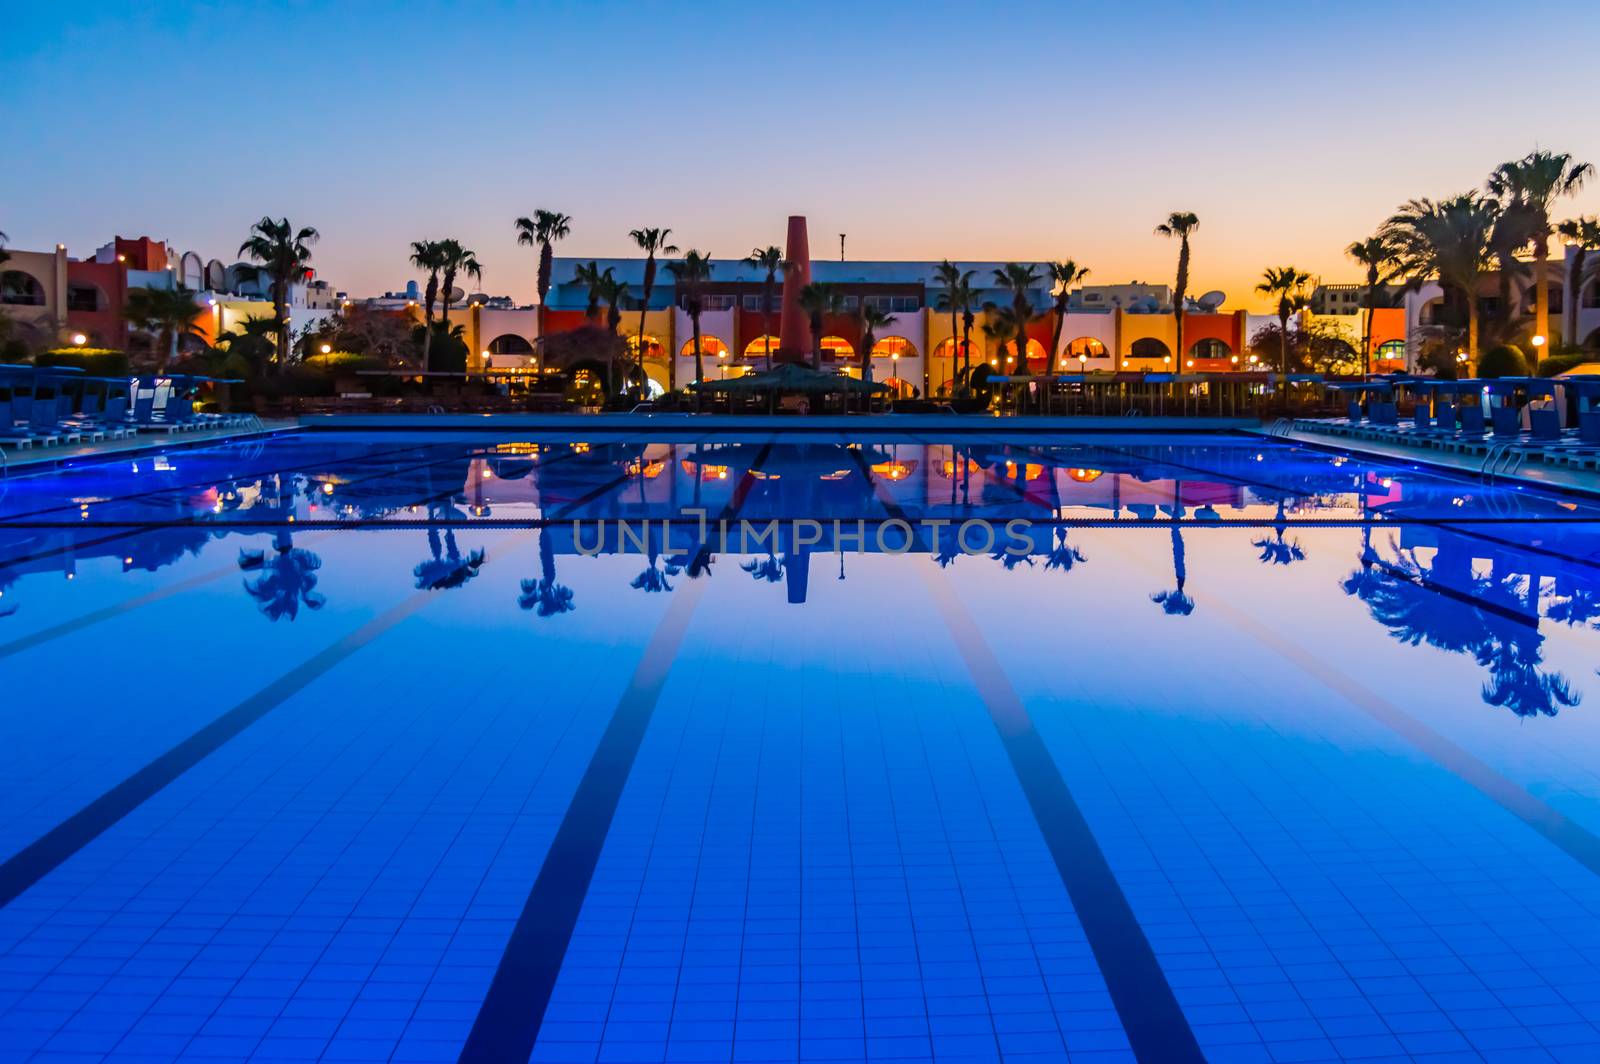 View of a pool at sunset with reflections of palm trees  by Philou1000